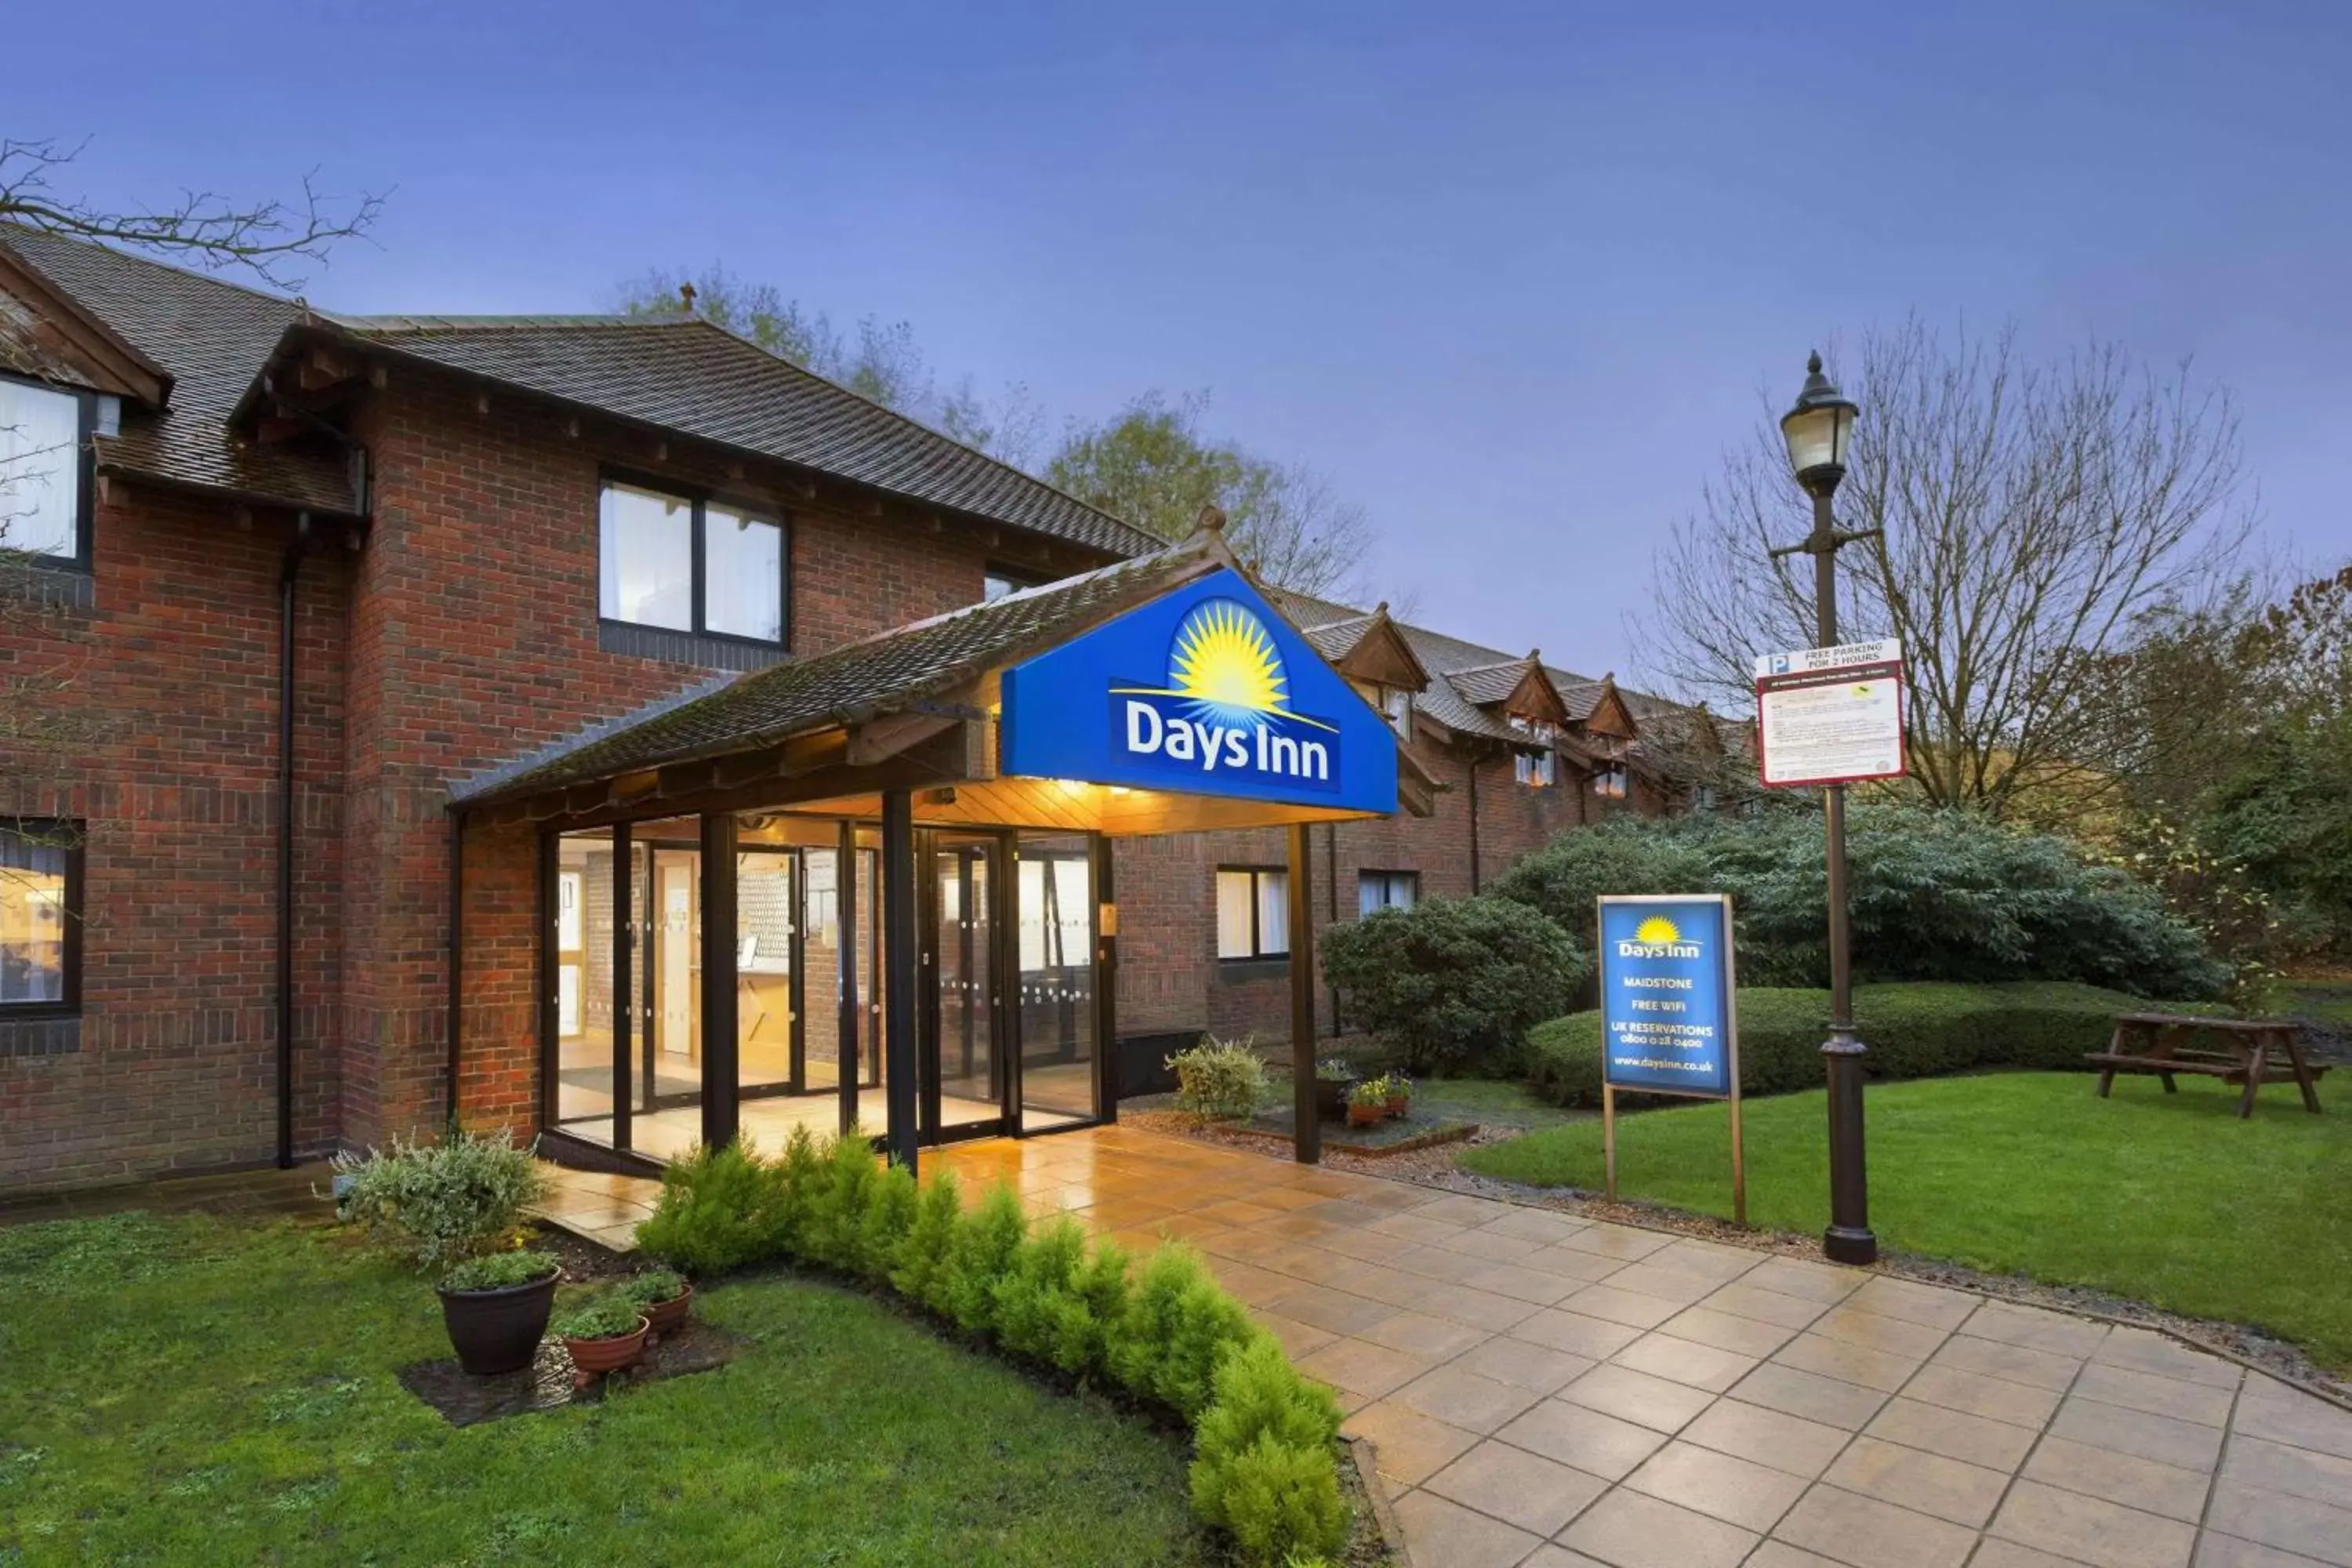 Property building in Days Inn Maidstone